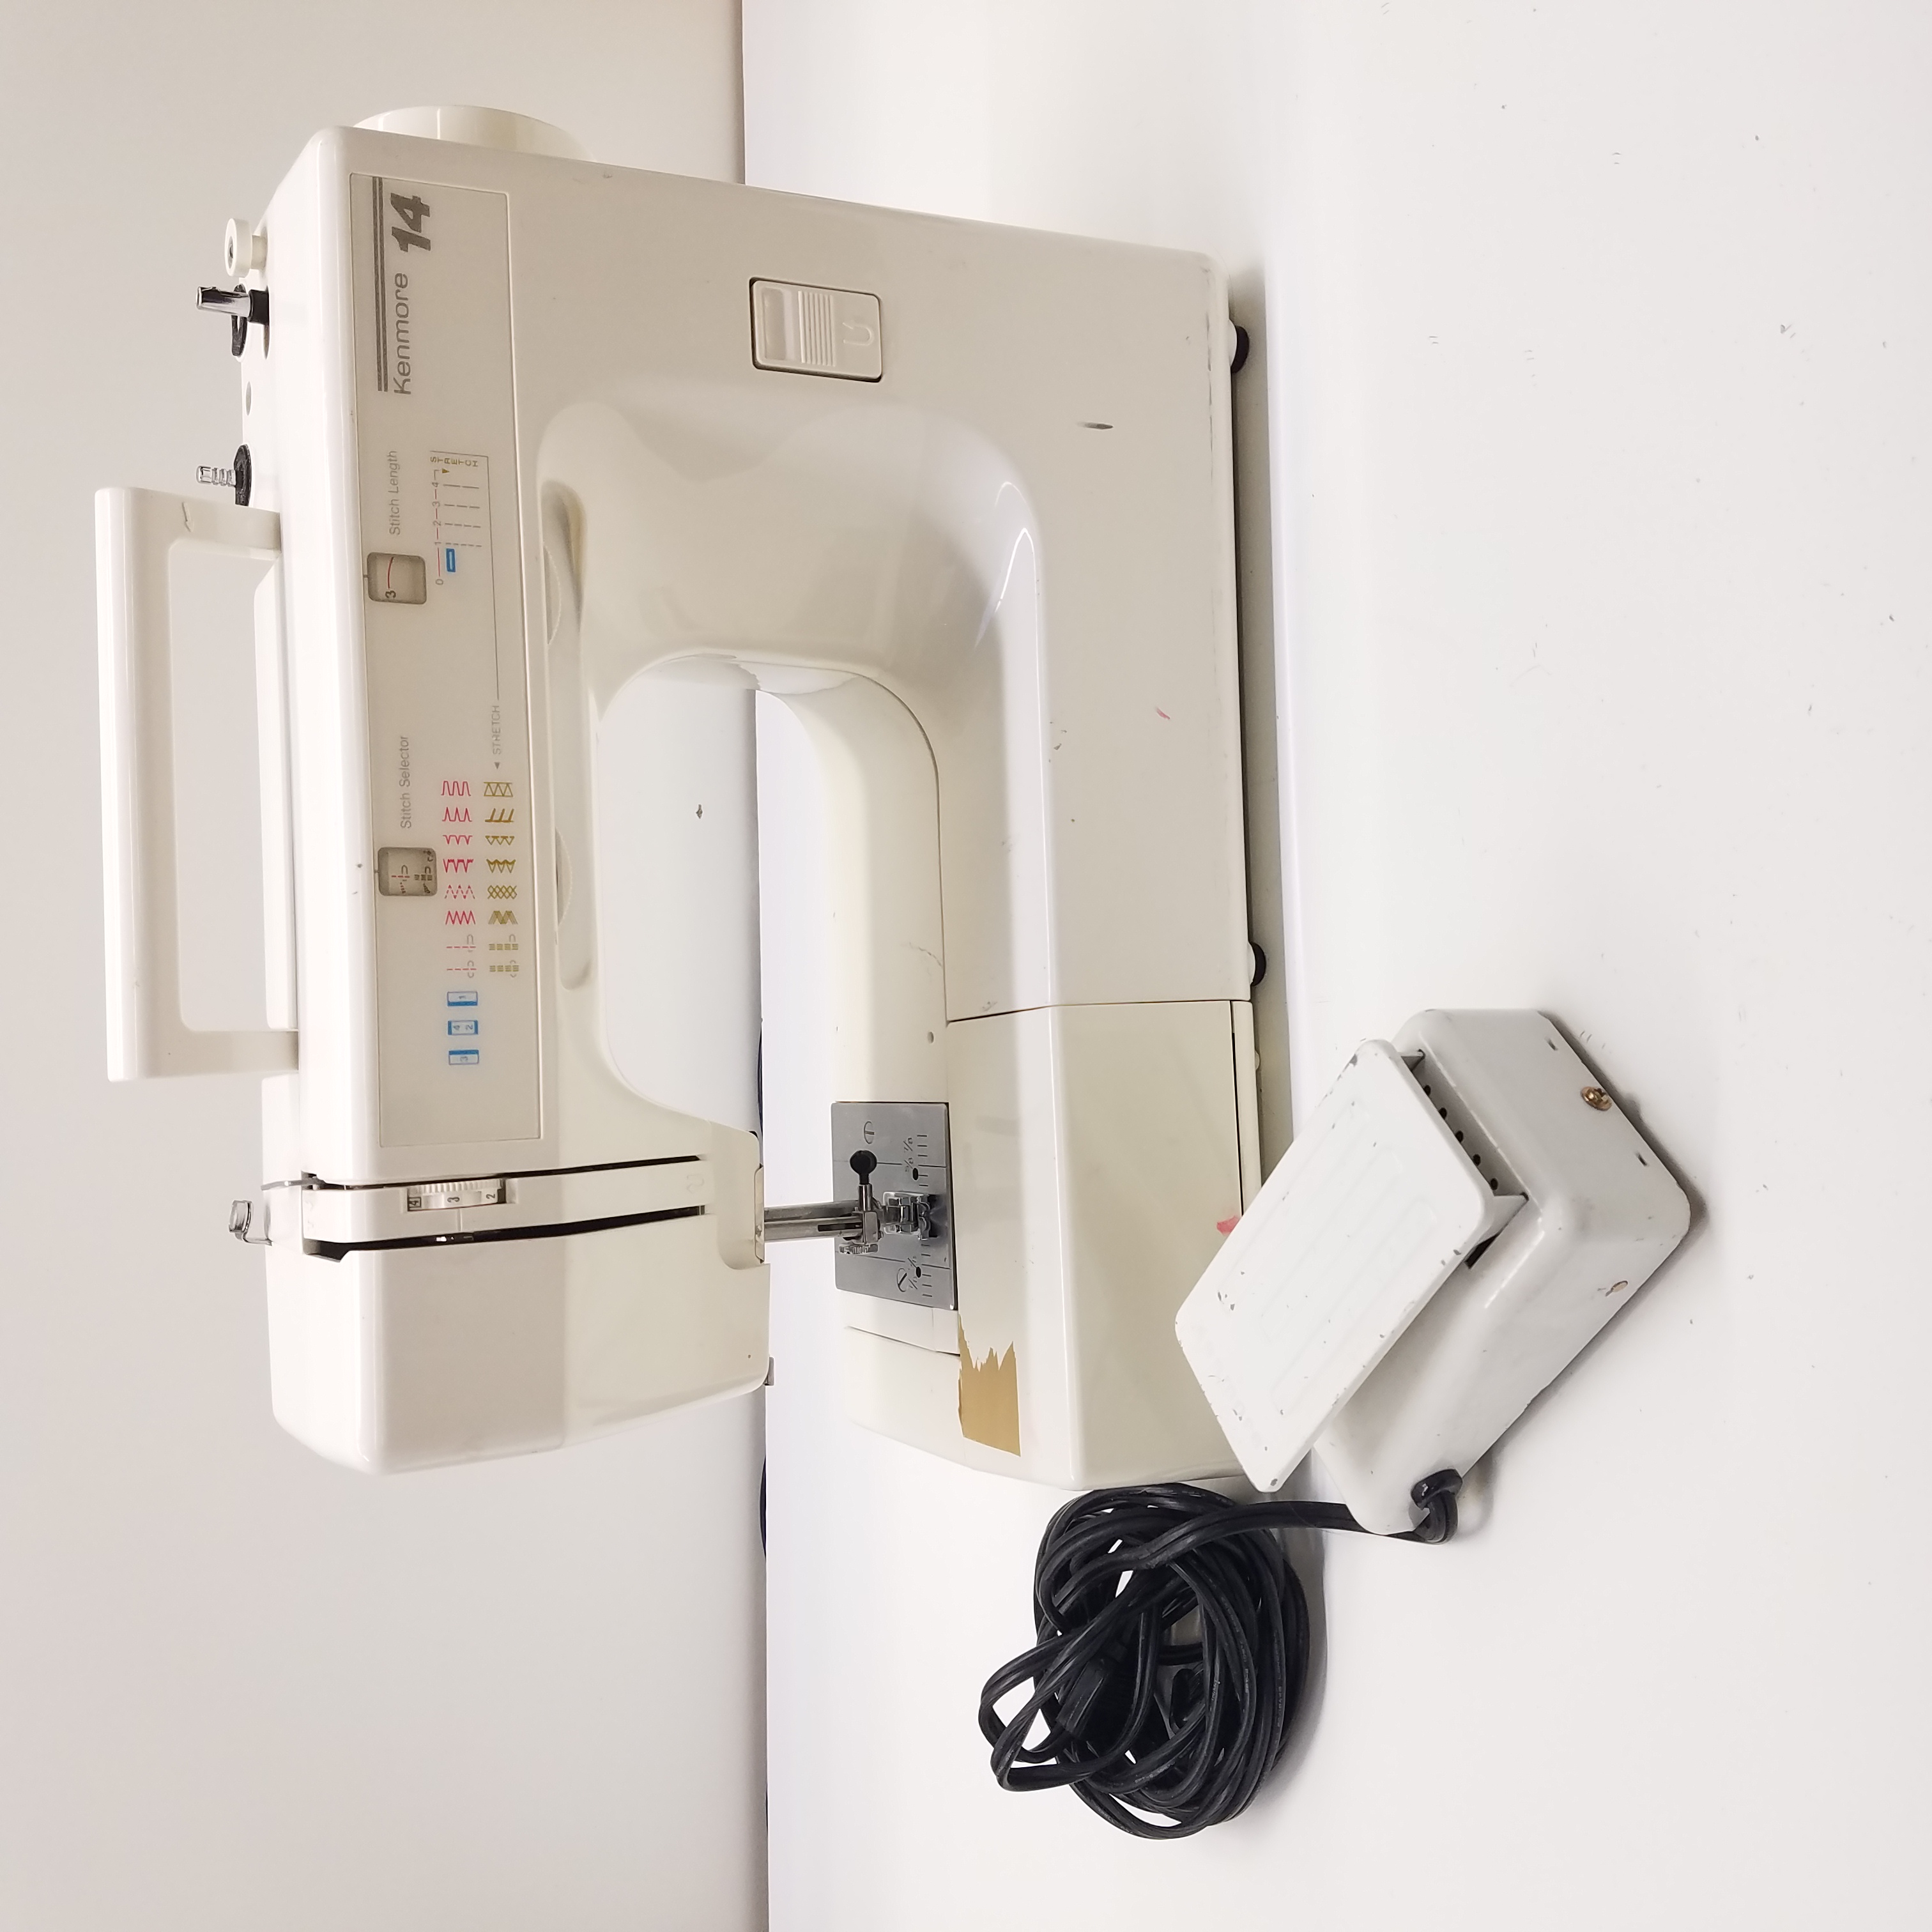 Buy the Sears Kenmore 14 Sewing Machine